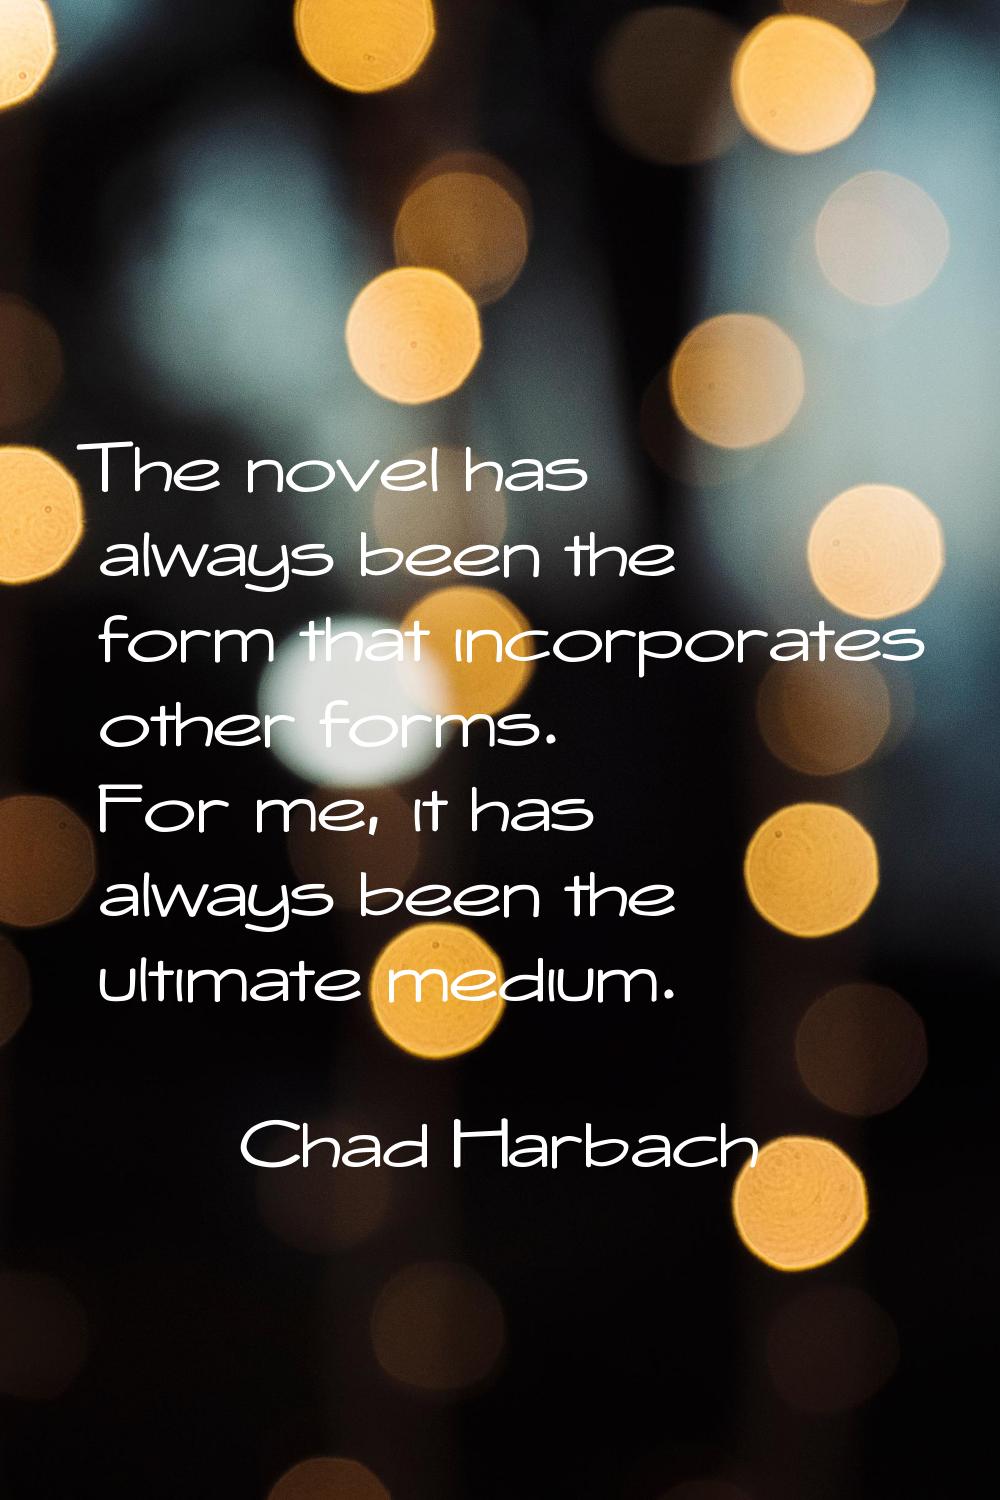 The novel has always been the form that incorporates other forms. For me, it has always been the ul